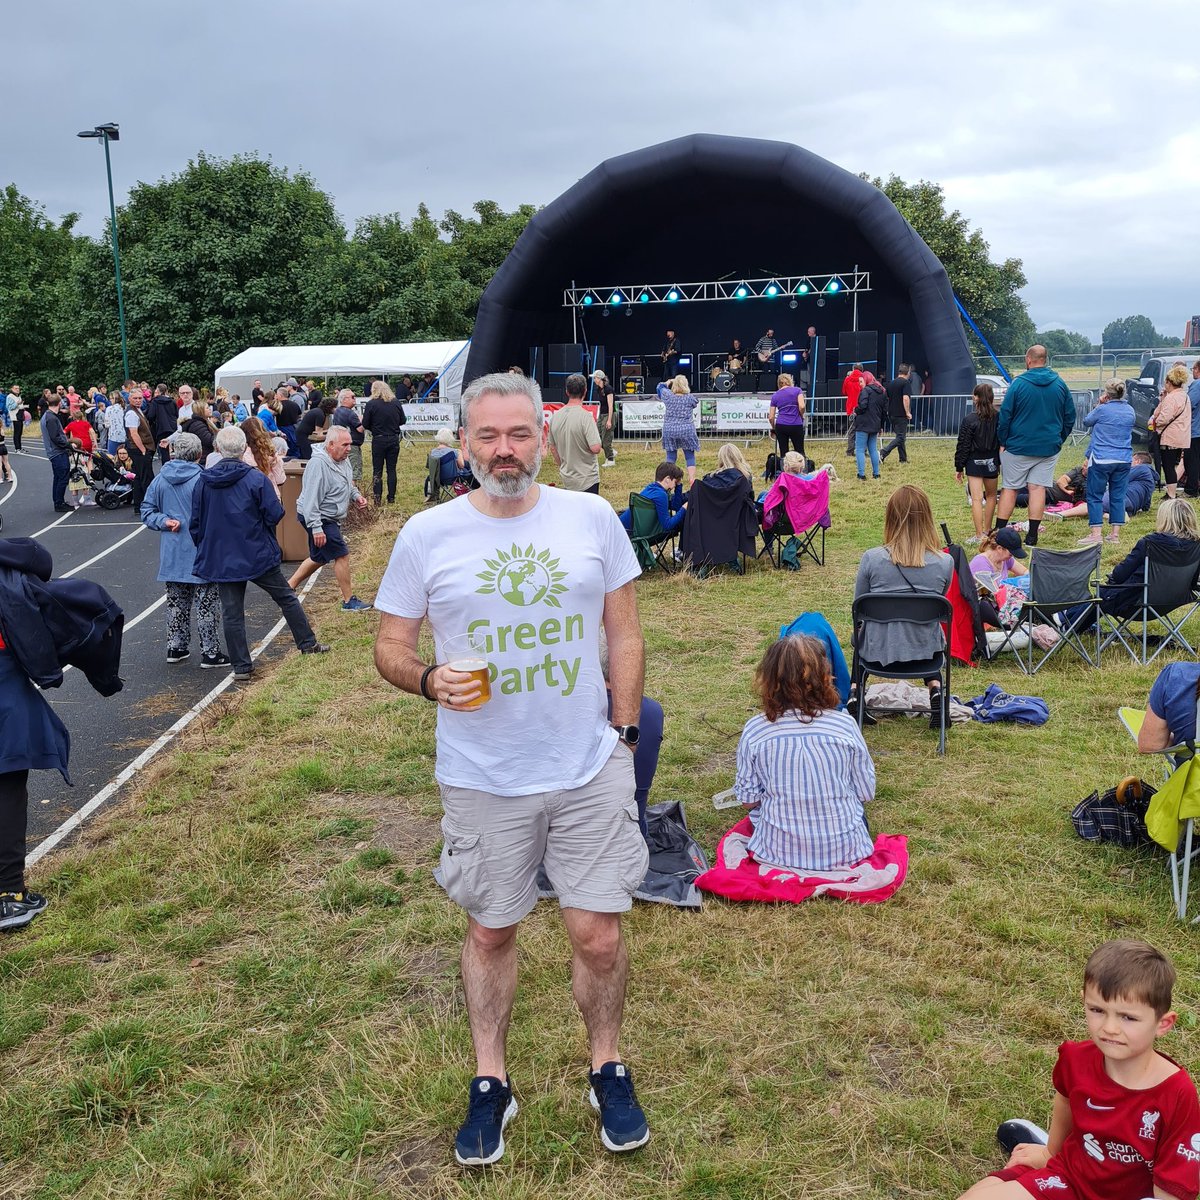 Here at @RimroseValley celebration day...its been brilliant so far...its a credit to @saverimrose....come down, its on till 8pm and bands are brilliant! #saverimrosevalley